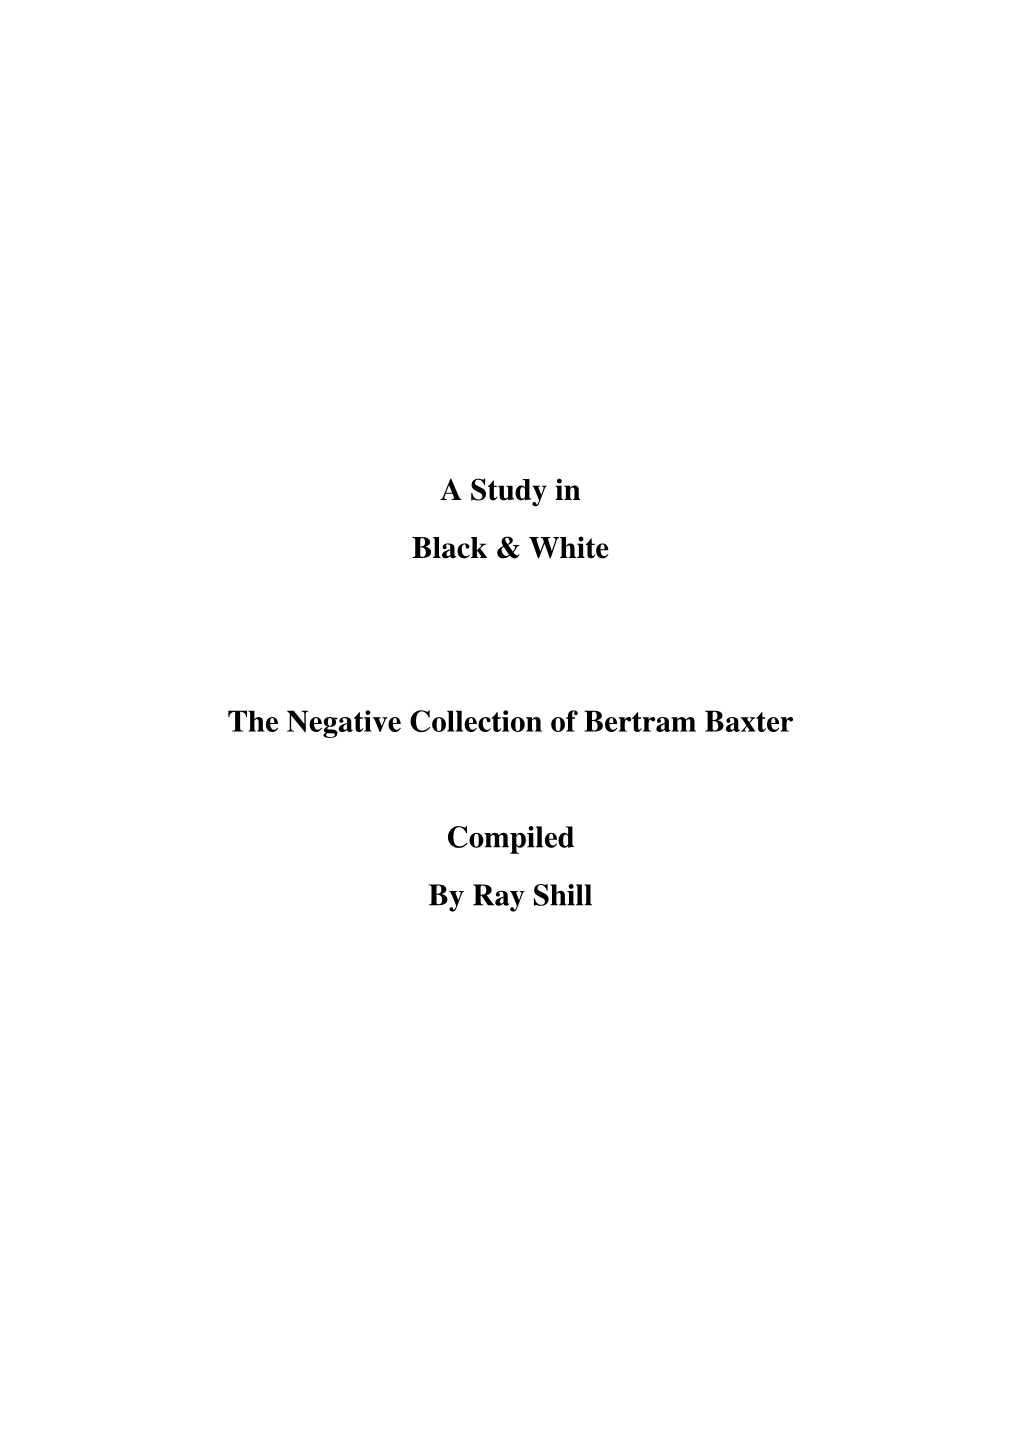 A Study in Black & White the Negative Collection of Bertram Baxter